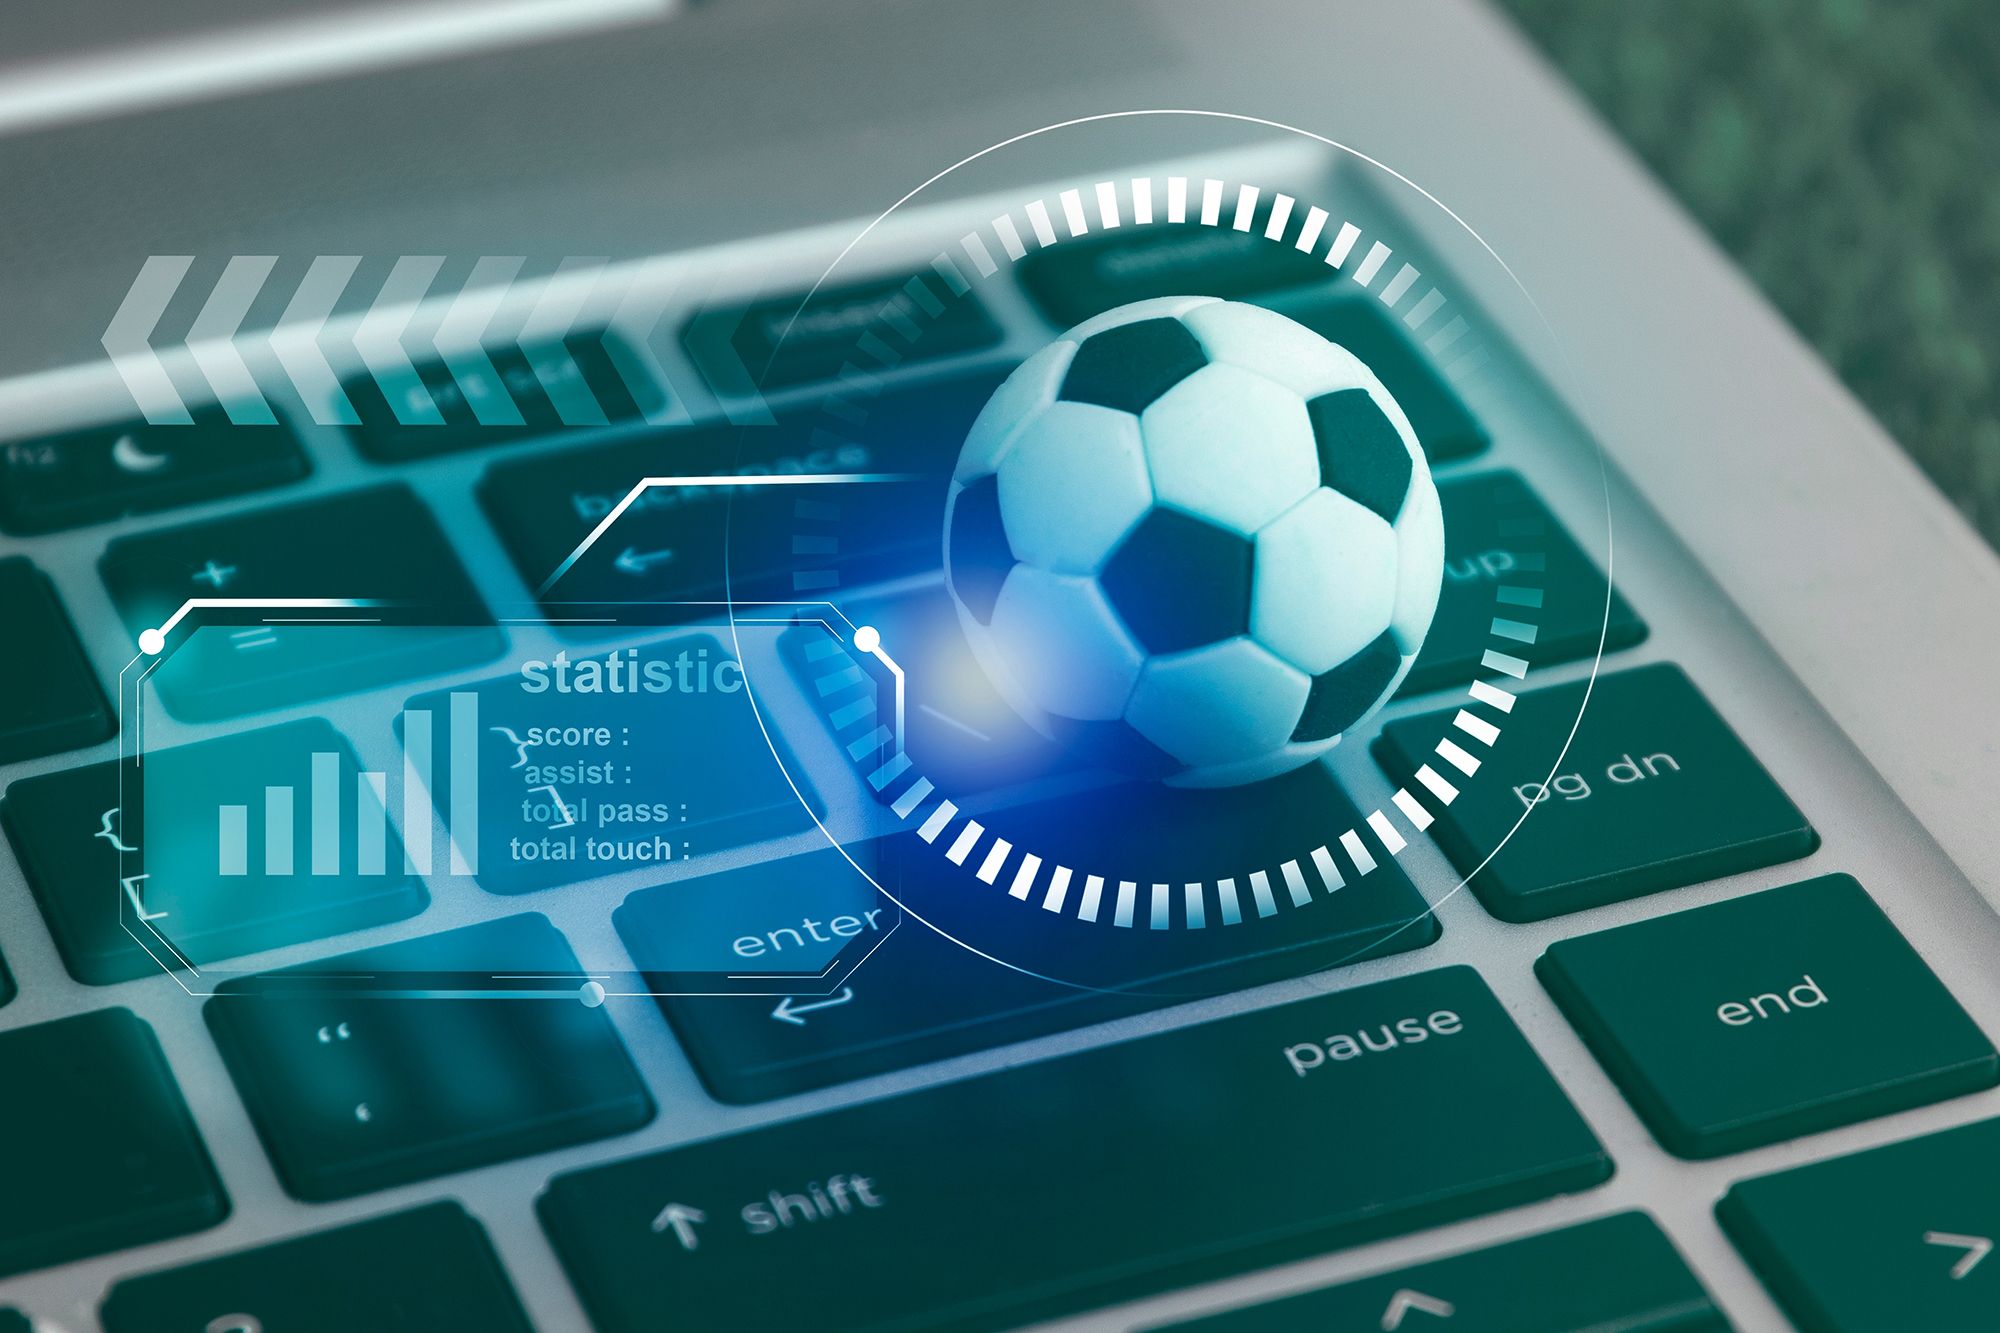 Role of data-driven personalisation in the sports prediction industry